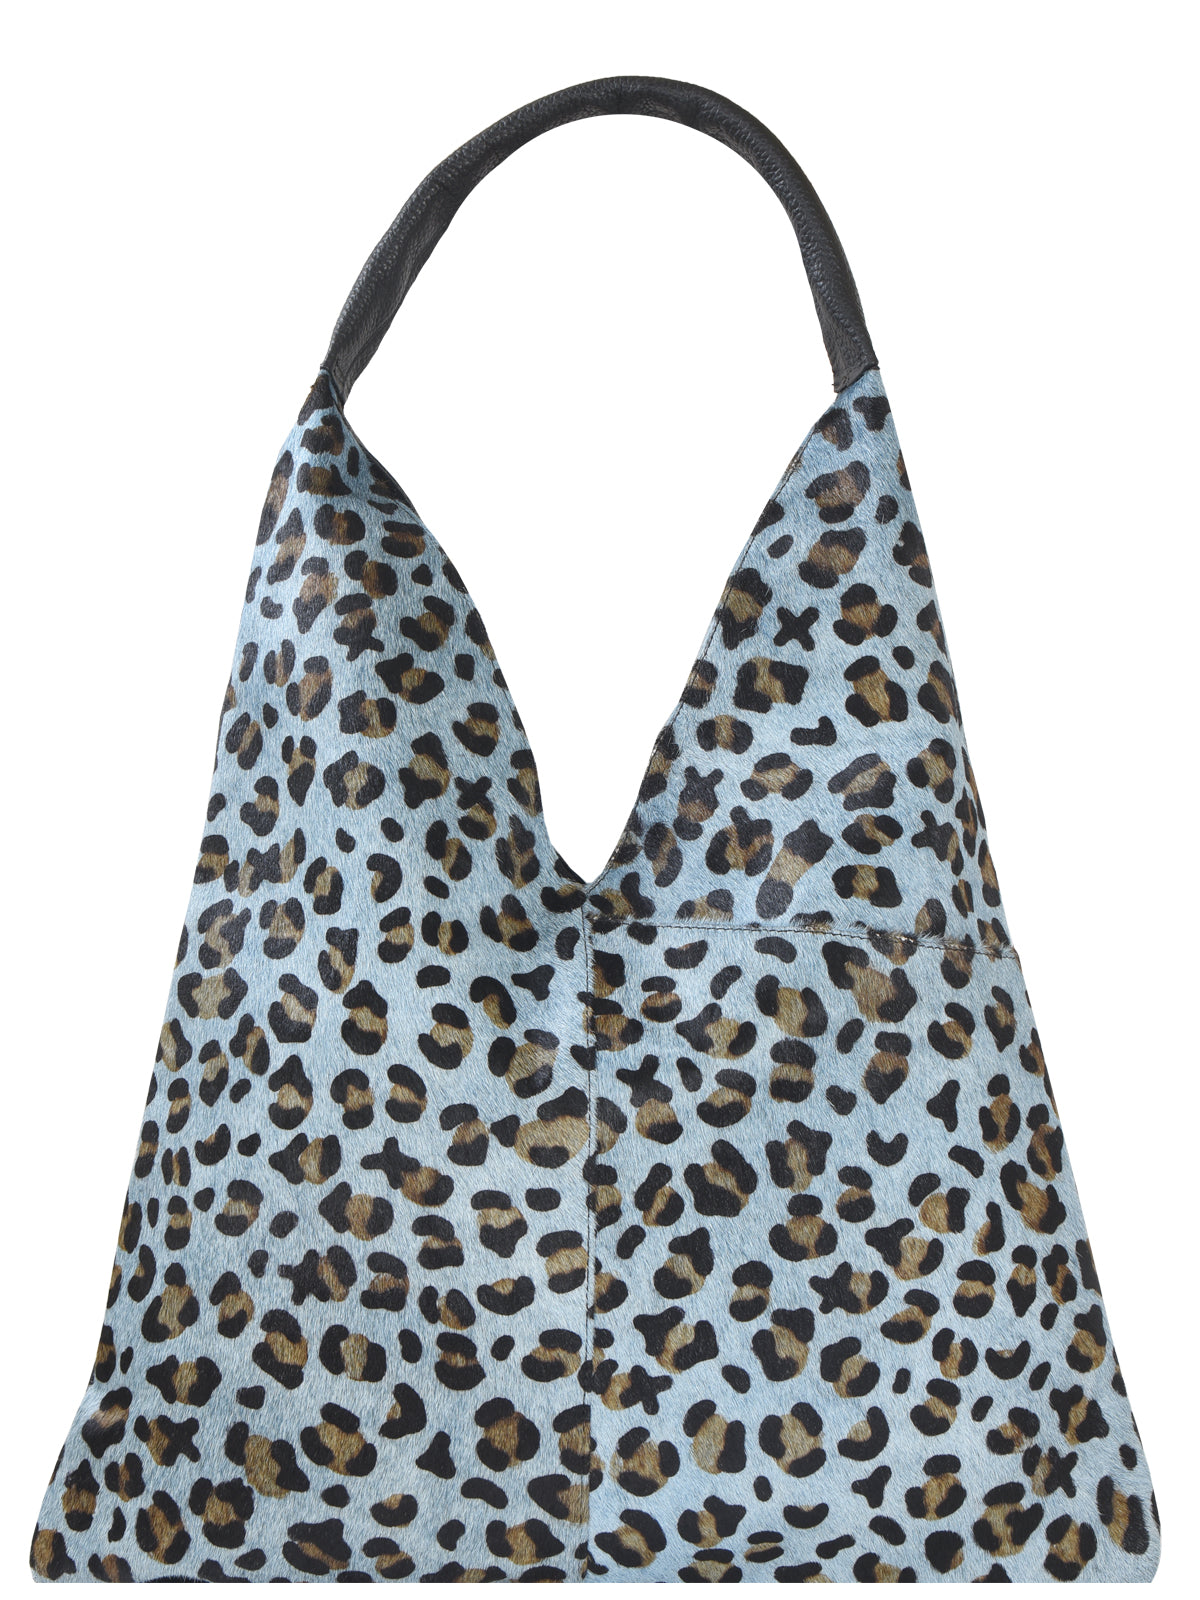 Blue Leopard Cowhide Leather Boho Leather Bag Brix Bailey Ethical Sustainable Bag Brand